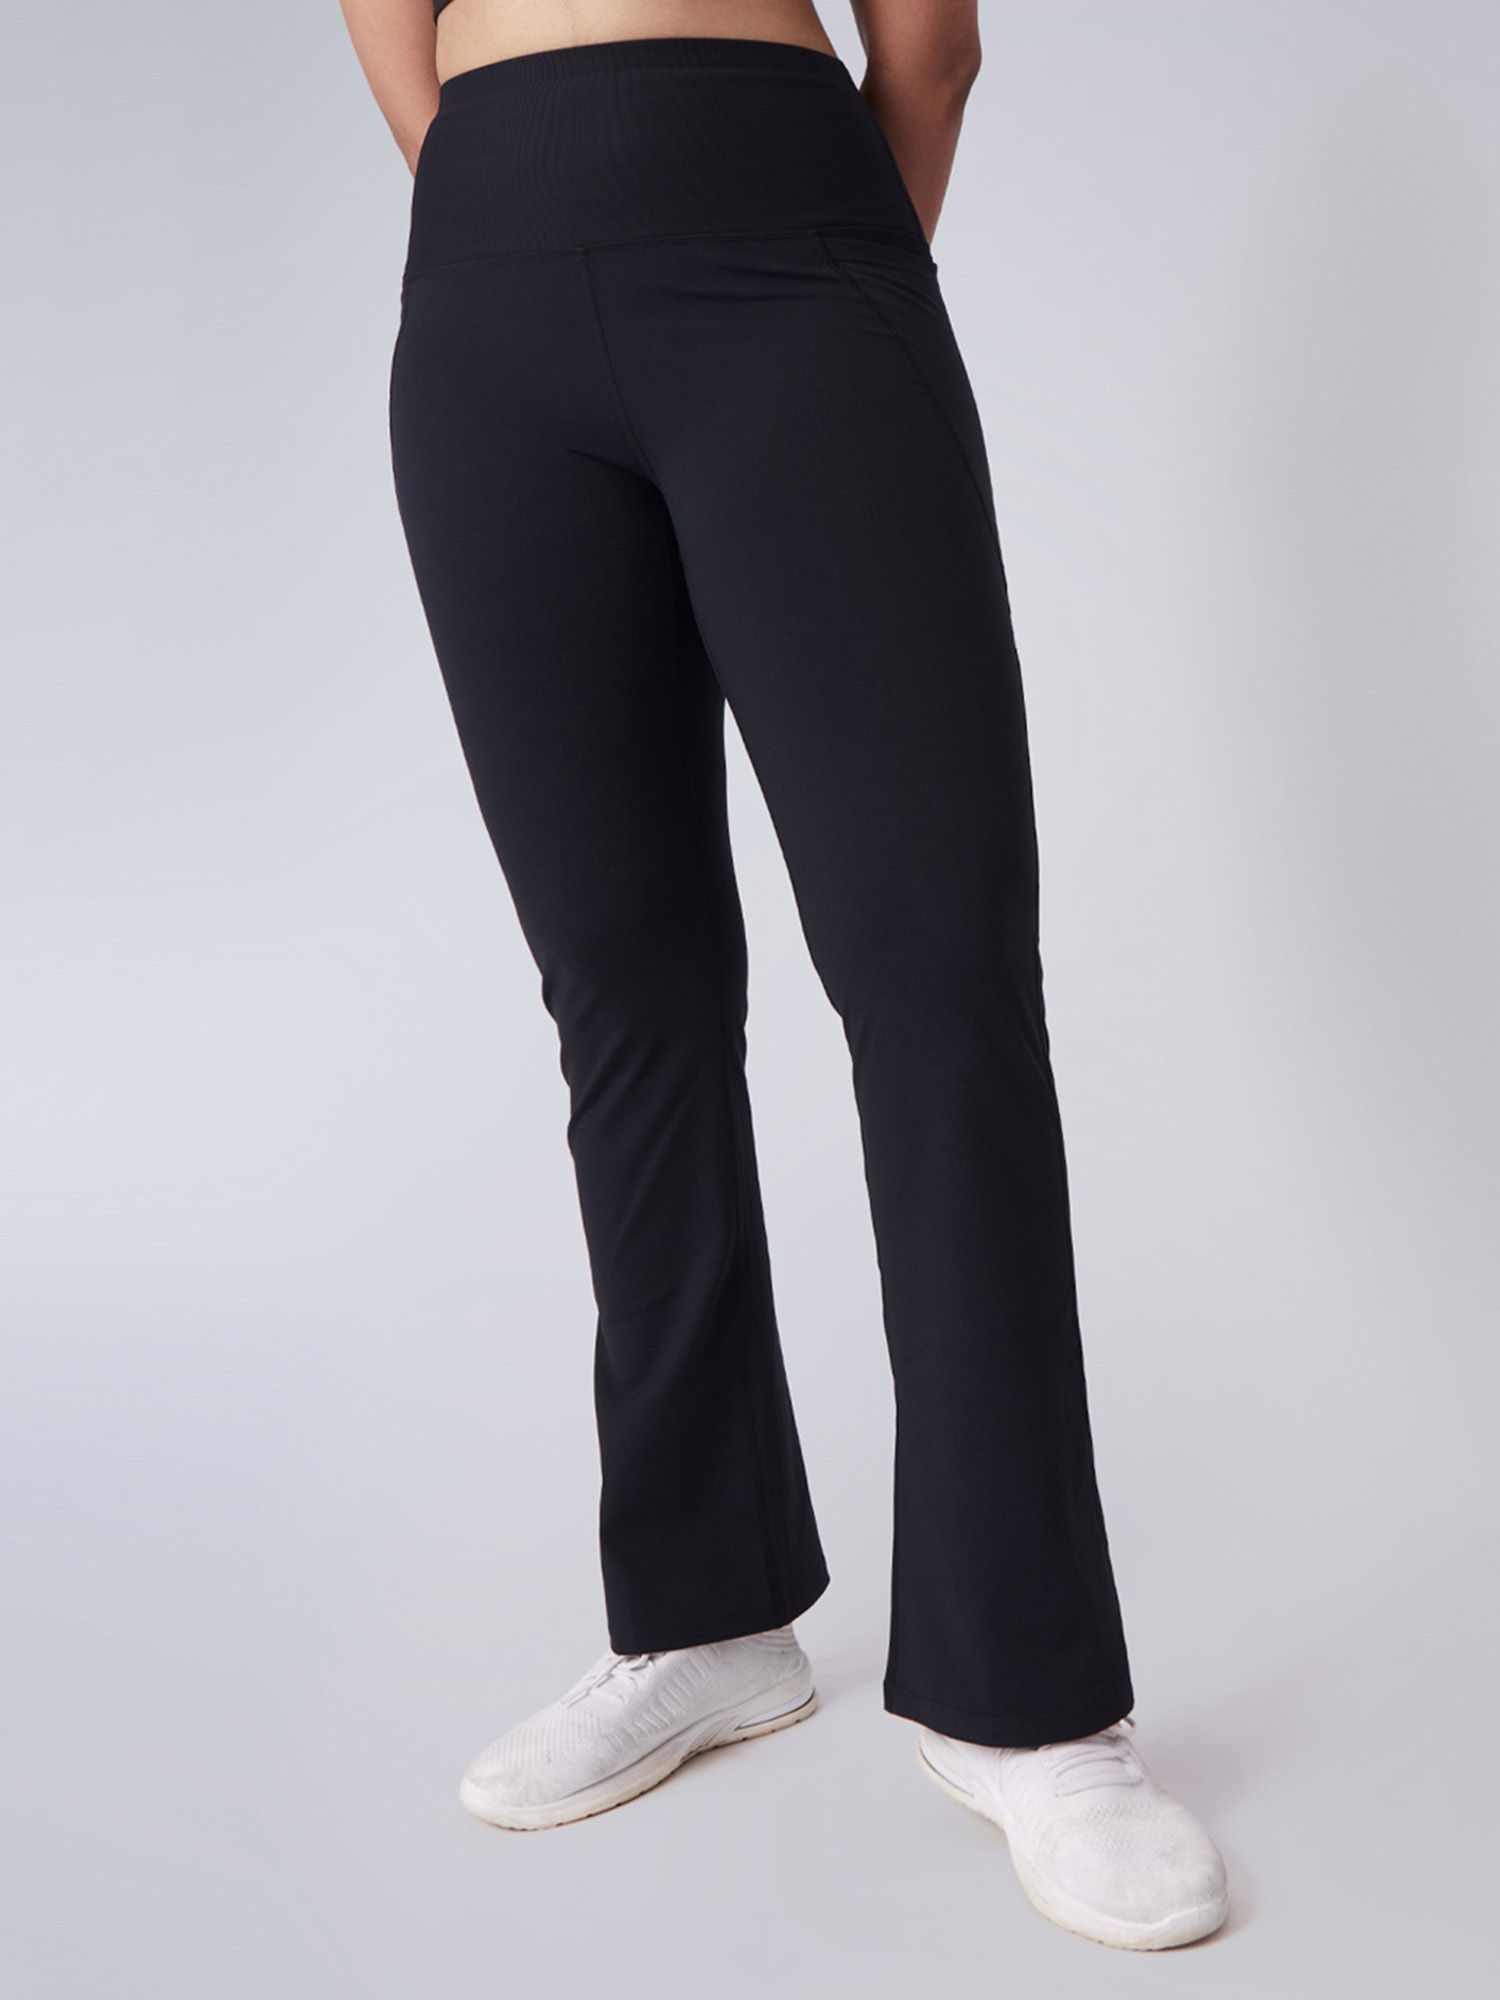 Tall pants for women: Reaching New Heights插图4